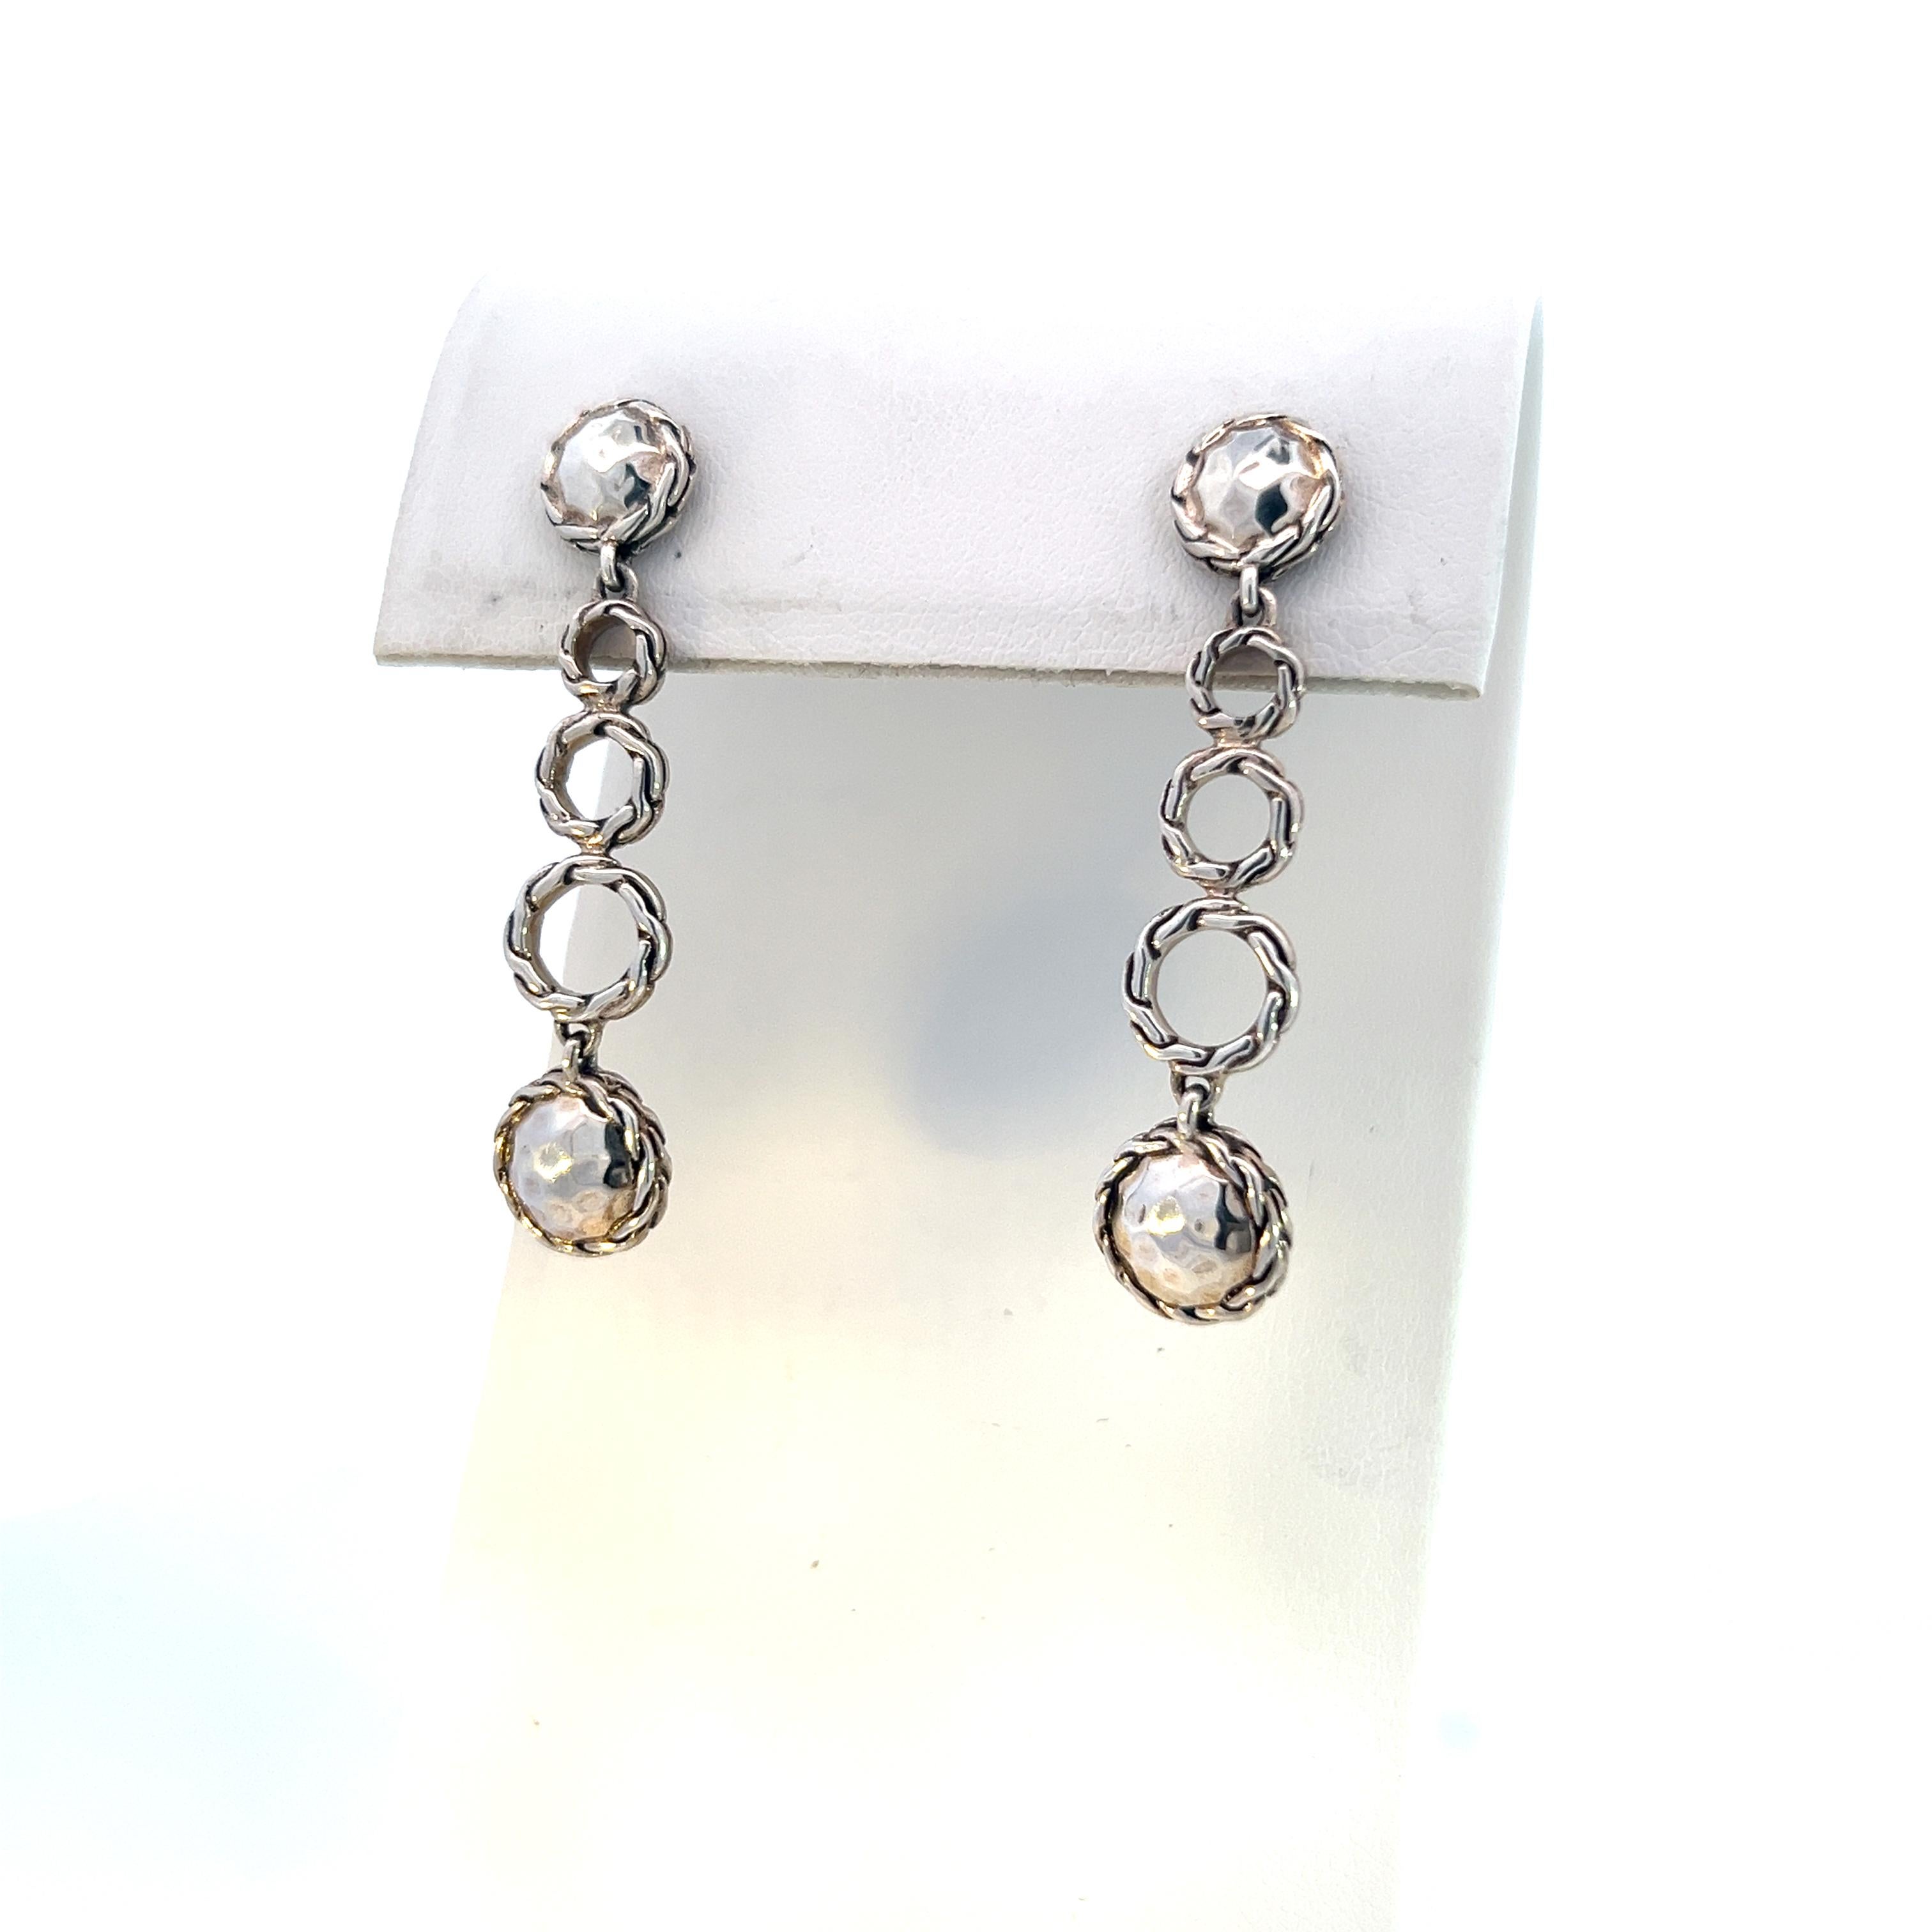 John Hardy Estate Woven Cable Dangle Earrings Sterling Silver JH91

TRUSTED SELLER SINCE 2002

PLEASE SEE OUR HUNDREDS OF POSITIVE FEEDBACKS FROM OUR CLIENTS!!

FREE SHIPPING!!

DETAILS
Long Graduated
Style: Woven Cable Dangle Earrings
Closure: Push